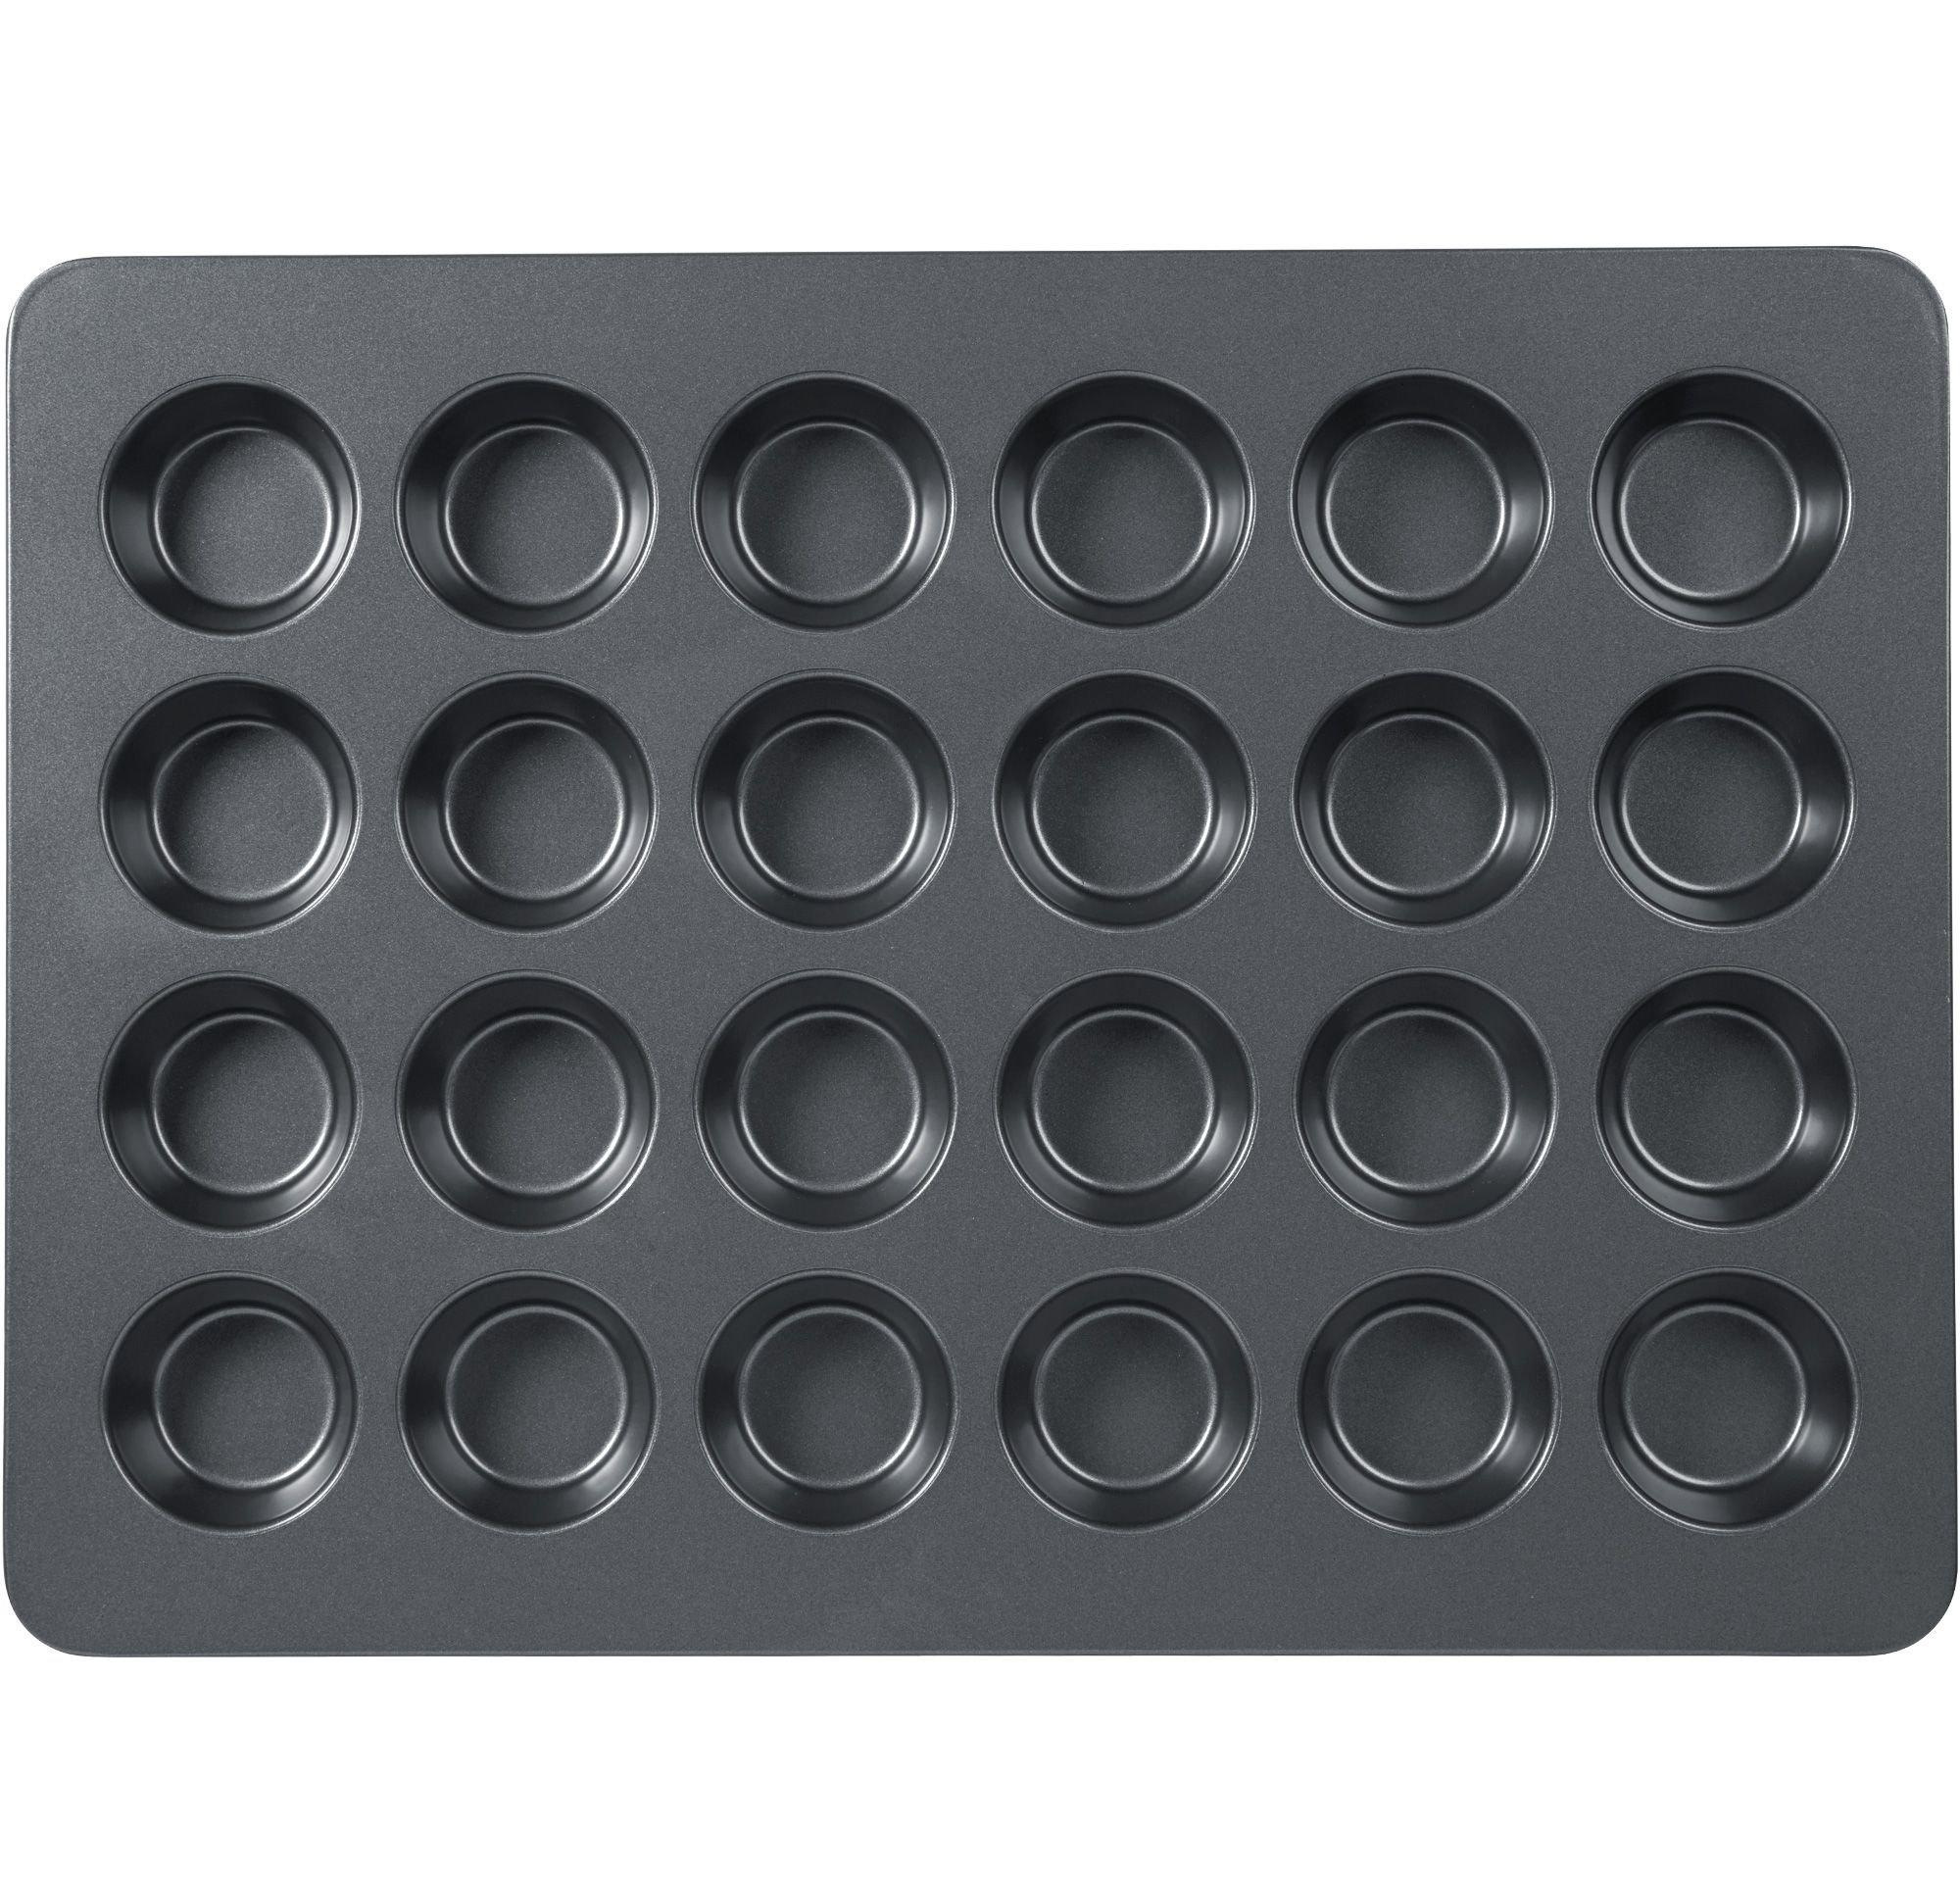 Wilton 24 Cup Large Non-Stick Muffin Pan